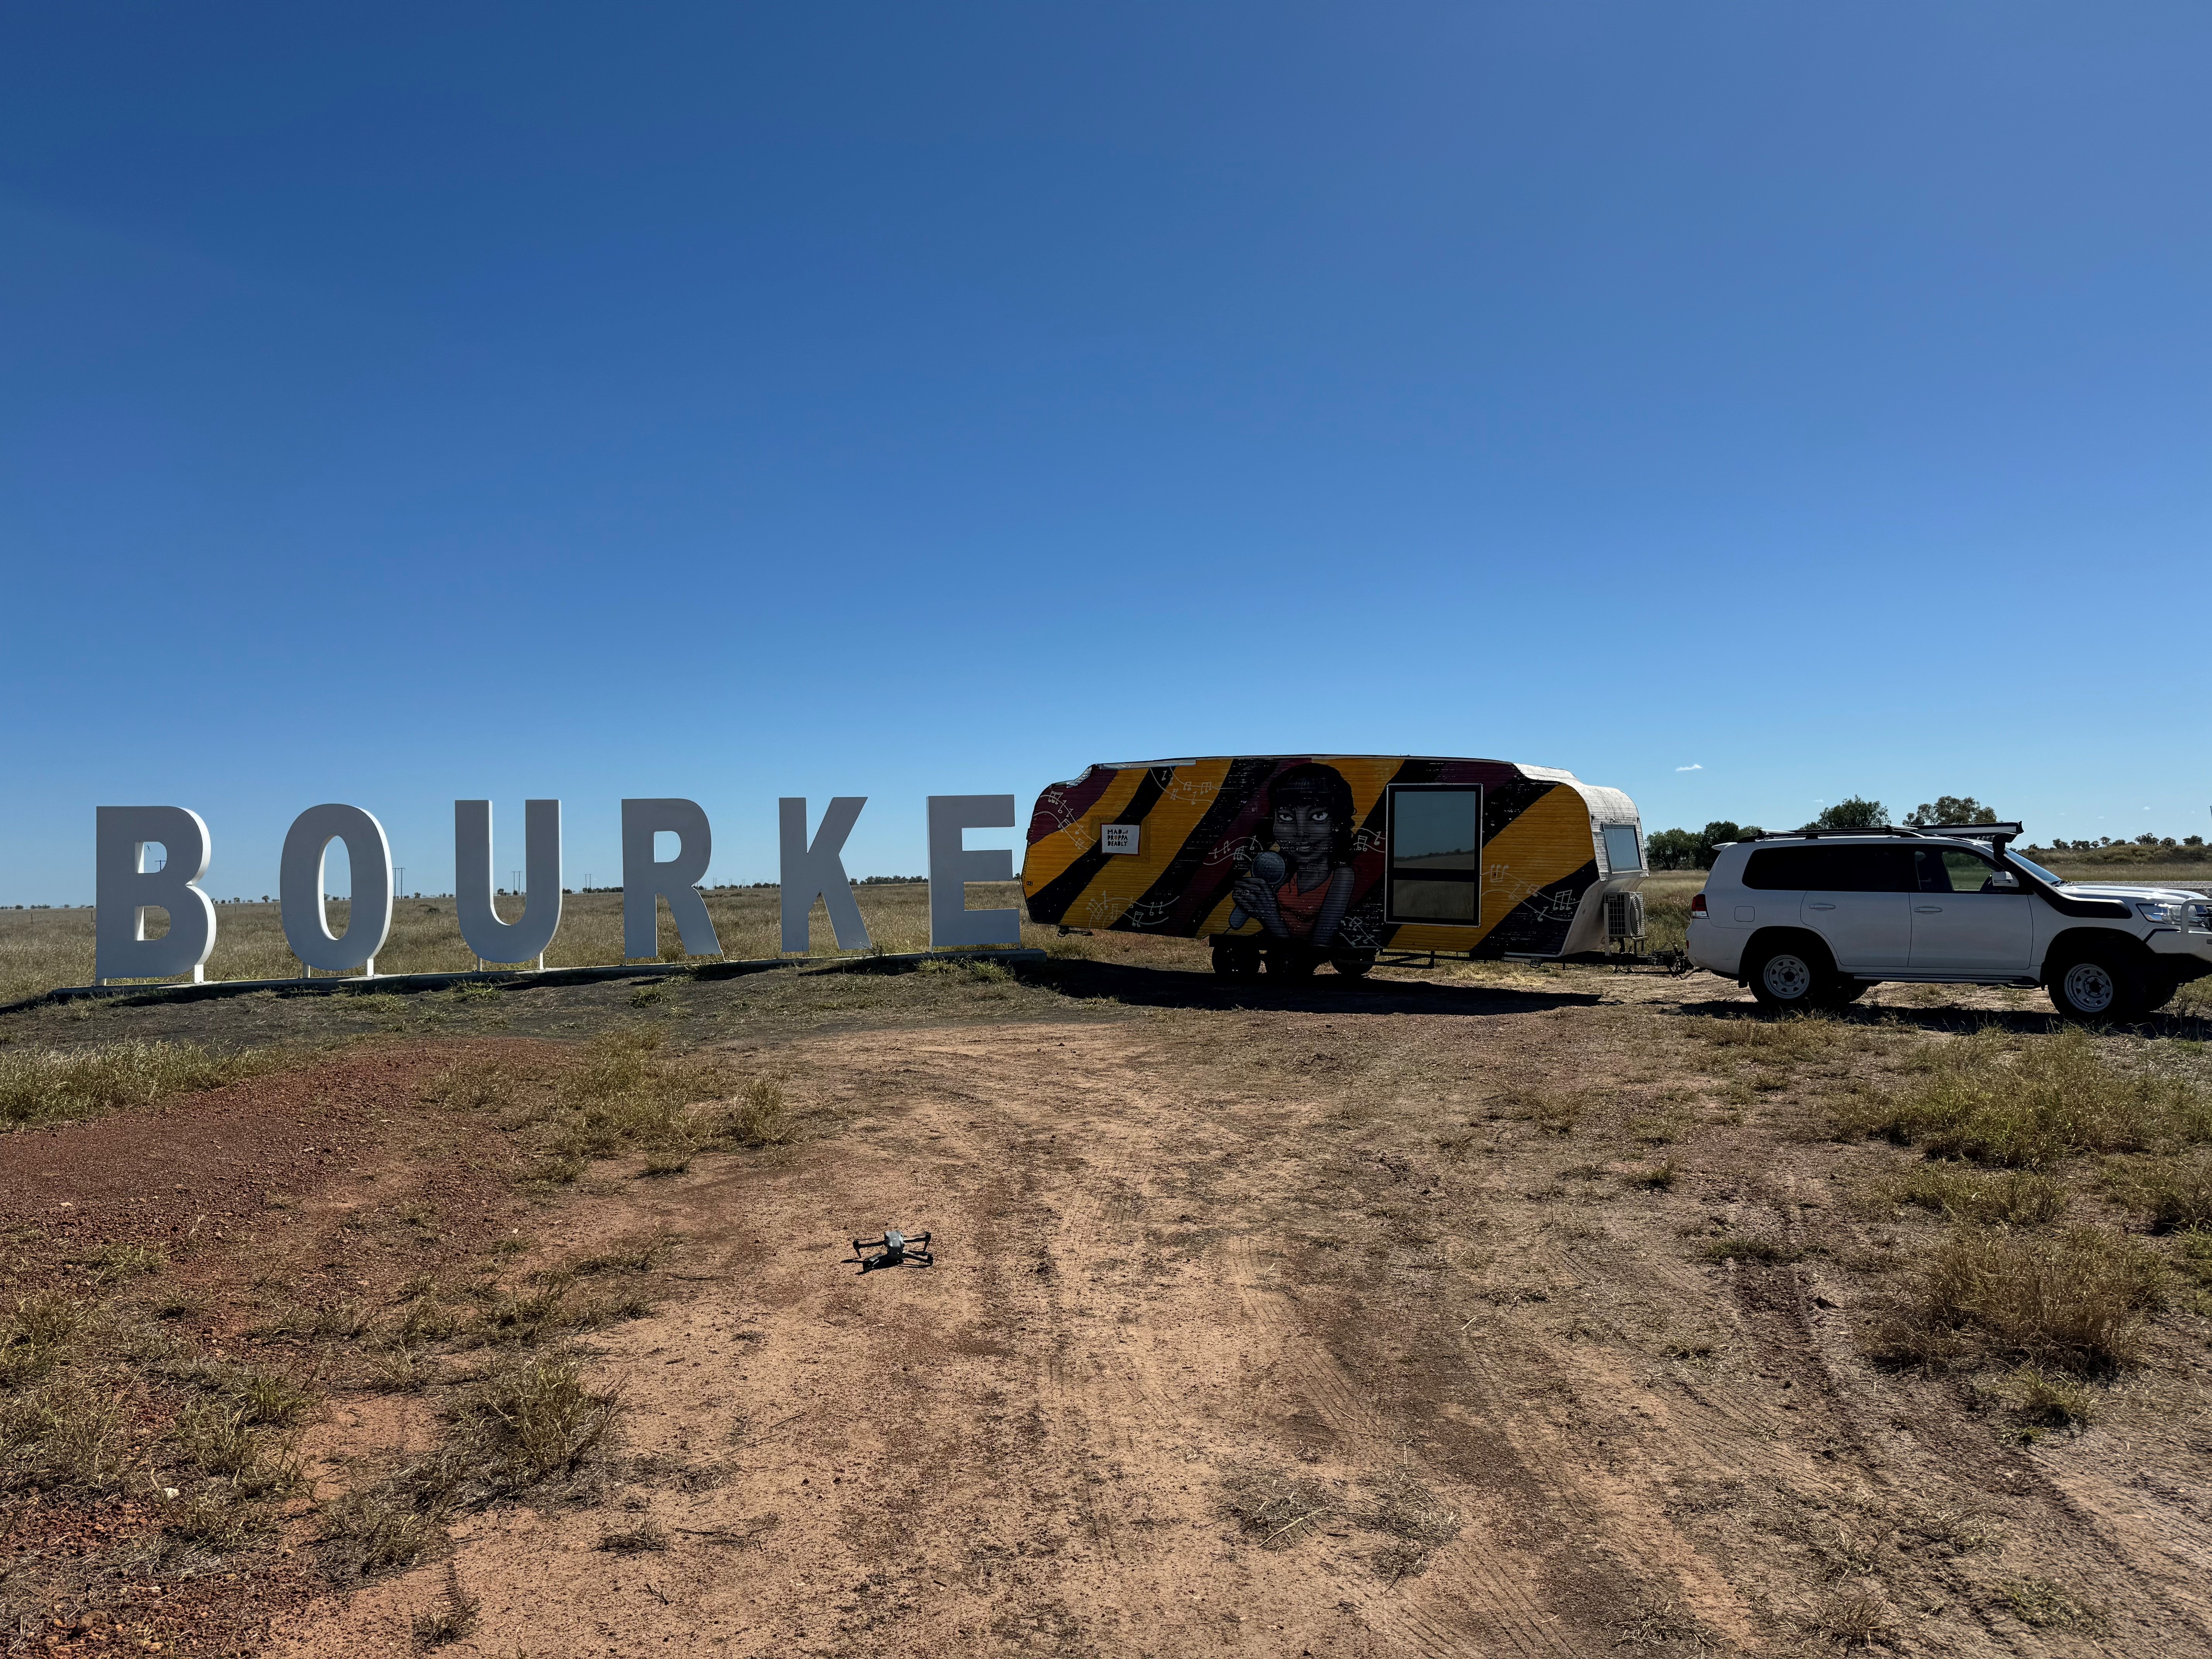 Large white letters spelling out 'Bourke' stand in a flat empty outdoor space. At the end of the sign is a four-wheel-drive with a caravan attached. The caravan is painted in yellow and black with an image of a person holding a microphone in the middle.